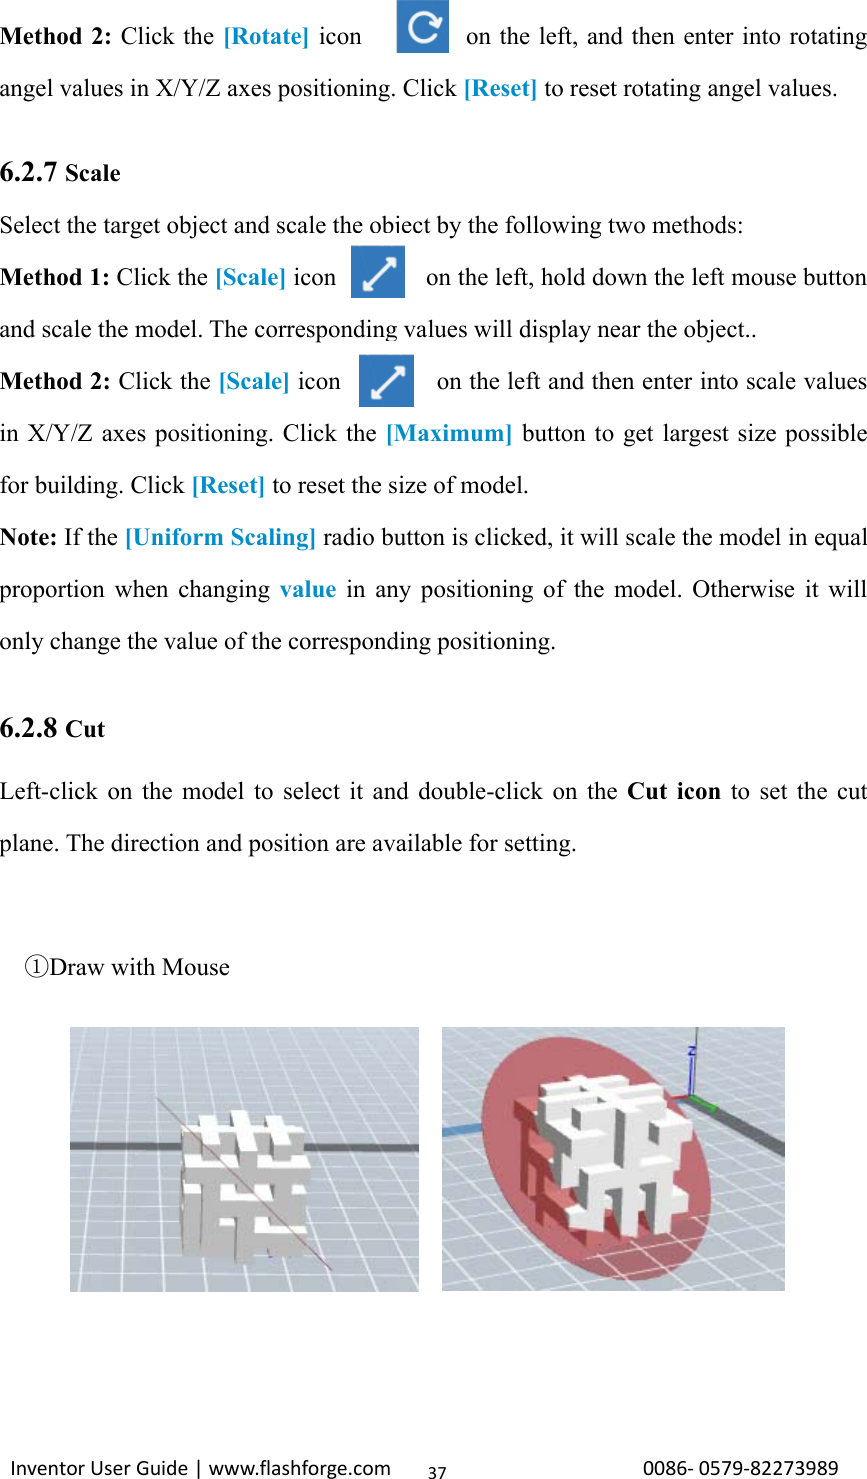 Inventor User Guide | www.flashforge.com 0086‐0579‐8227398937Method 2: Click the [Rotate] icon on the left, and then enter into rotatingangel values in X/Y/Z axes positioning. Click [Reset] to reset rotating angel values.6.2.7 ScaleSelect the target object and scale the object by the following two methods:Method 1: Click the [Scale] icon on the left, hold down the left mouse buttonand scale the model. The corresponding values will display near the object..Method 2: Click the [Scale] icon on the left and then enter into scale valuesin X/Y/Z axes positioning. Click the [Maximum] button to get largest size possiblefor building. Click [Reset] to reset the size of model.Note: If the [Uniform Scaling] radio button is clicked, it will scale the model in equalproportion when changing value in any positioning of the model. Otherwise it willonly change the value of the corresponding positioning.6.2.8 CutLeft-click on the model to select it and double-click on the Cut icon to set the cutplane. The direction and position are available for setting.①Draw with Mouse